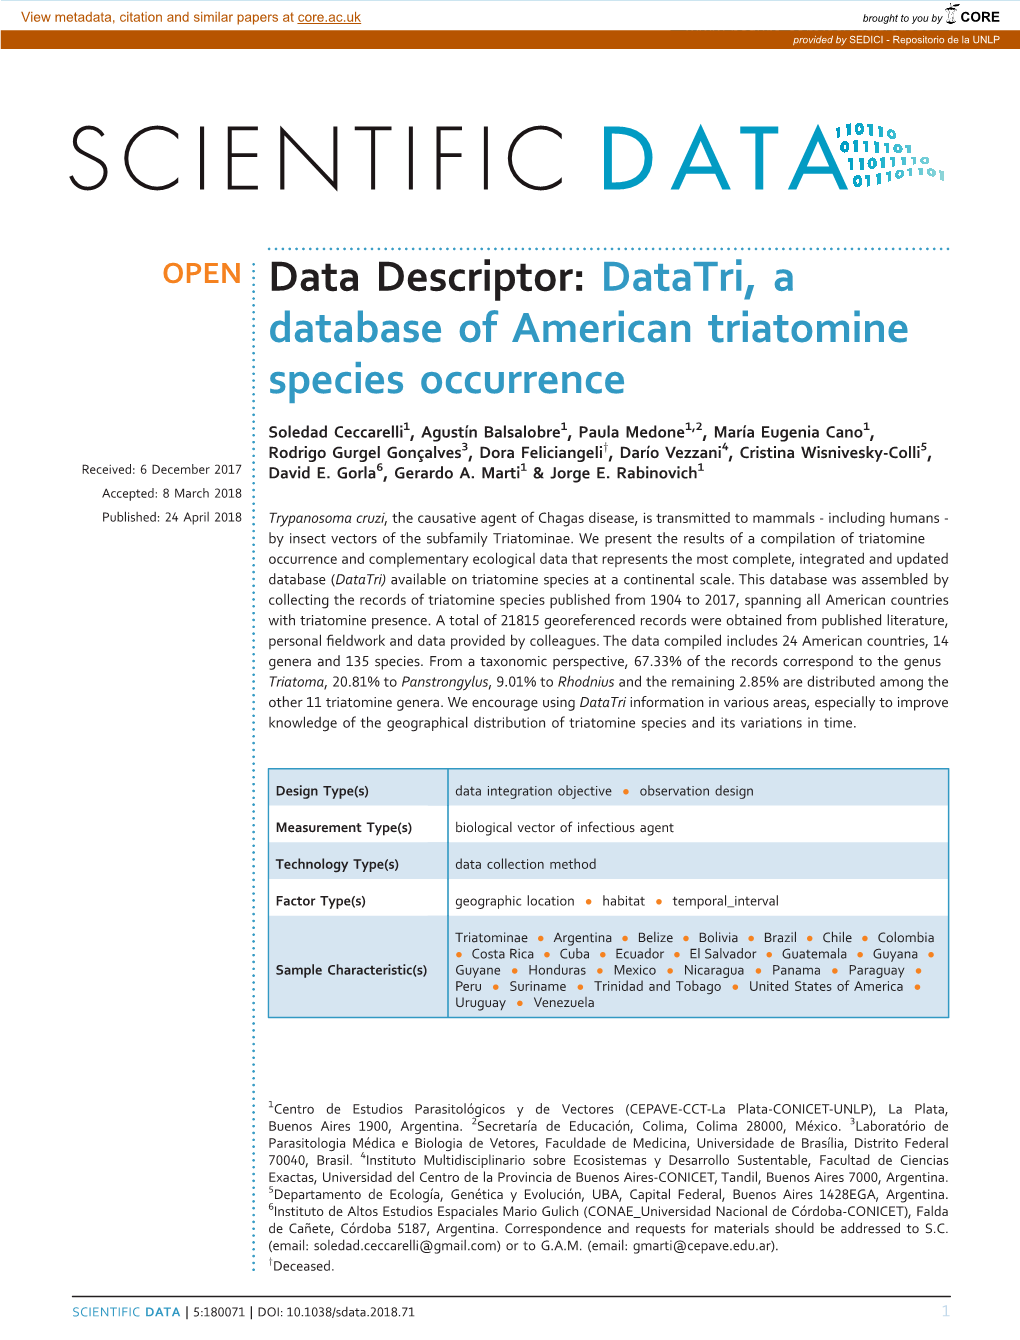 Datatri, a Database of American Triatomine Species Occurrence